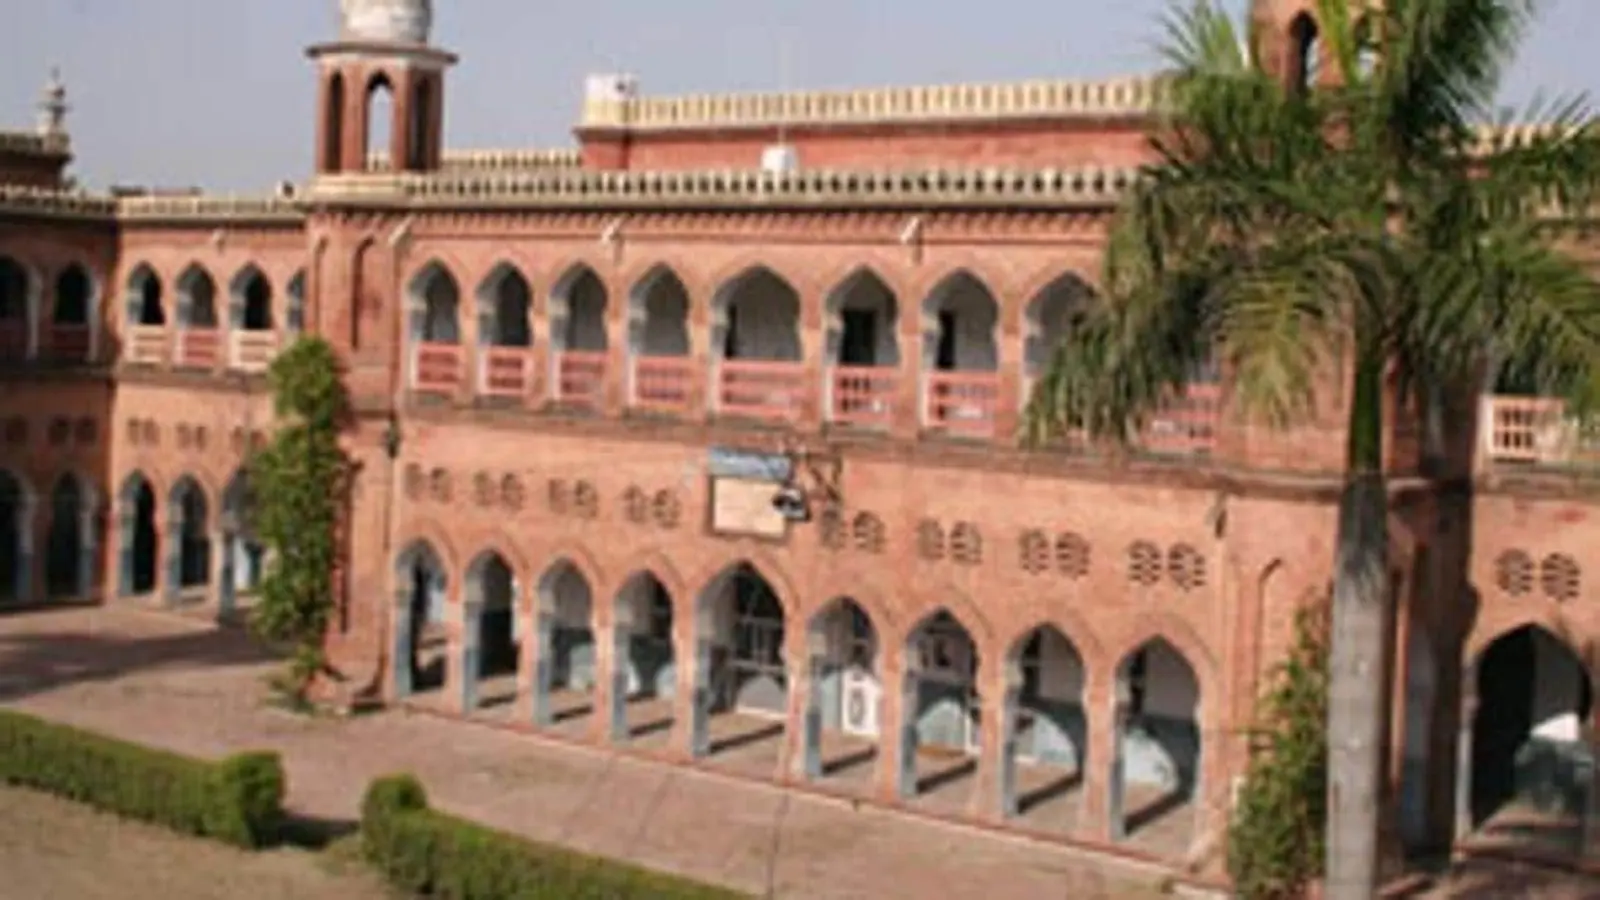 Evening brief: Aligarh Muslim University to participate in CUET for UG admissions, and all the latest news